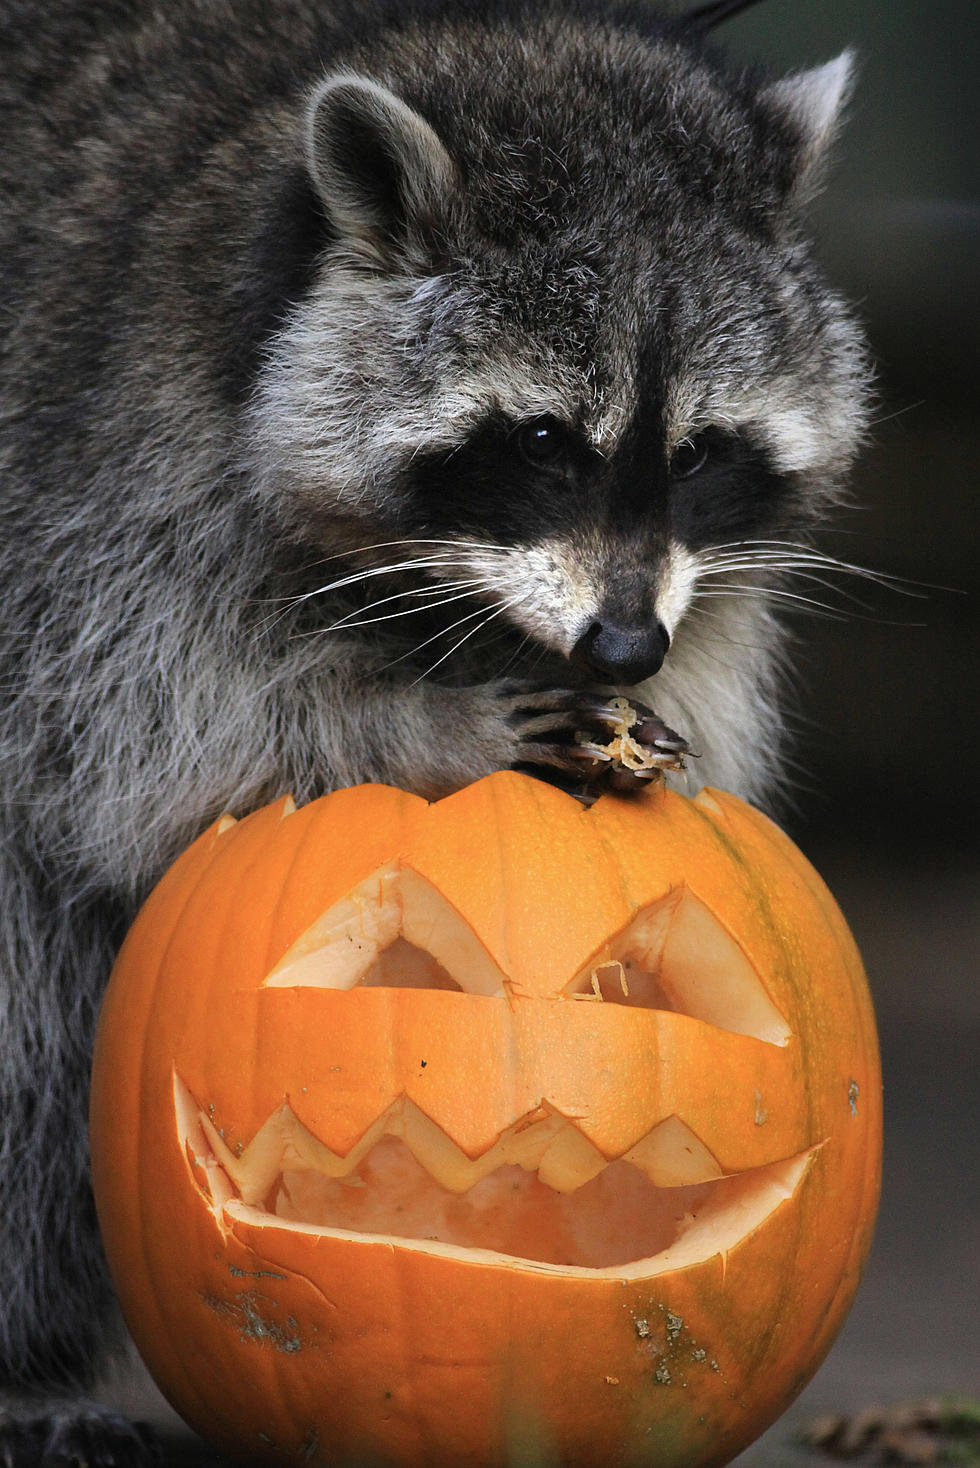 The Minnesota DNR Warns Pet Owners About Distemper From Racoons That Can Spread to Dogs